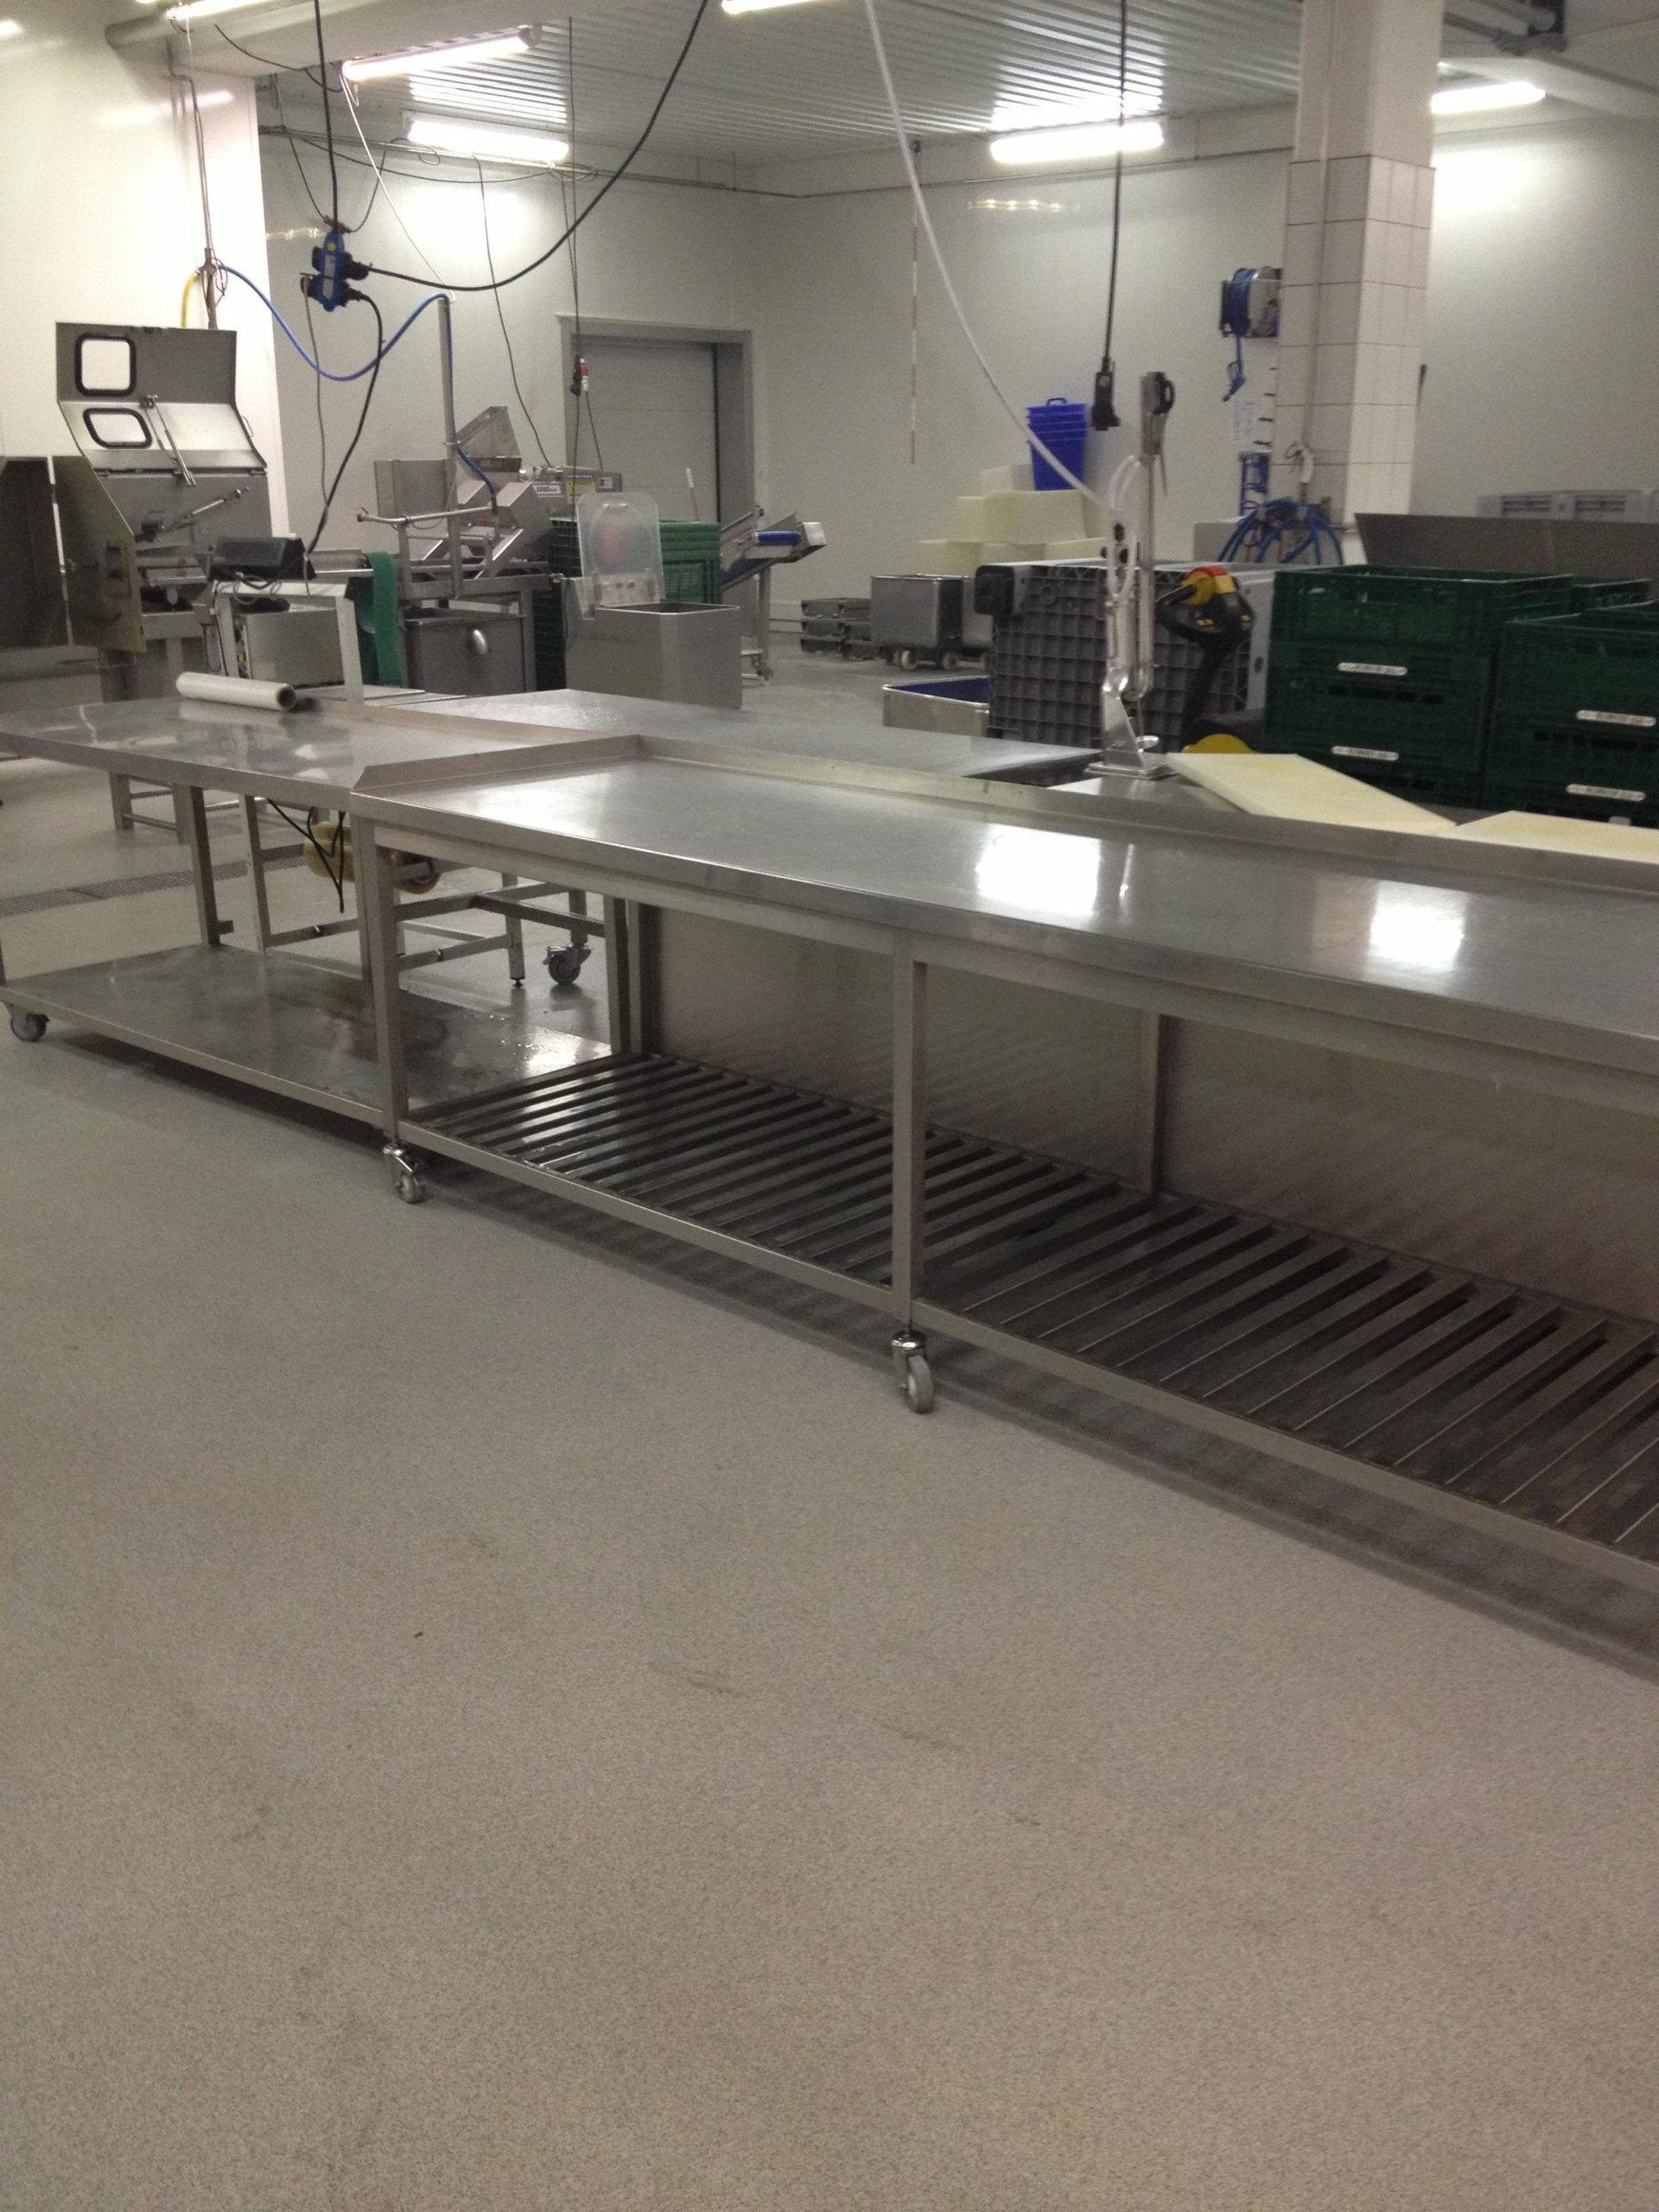 nbspBest flooring option for a Bakery Urethane Concrete System | Duraamen Engineered Products Inc